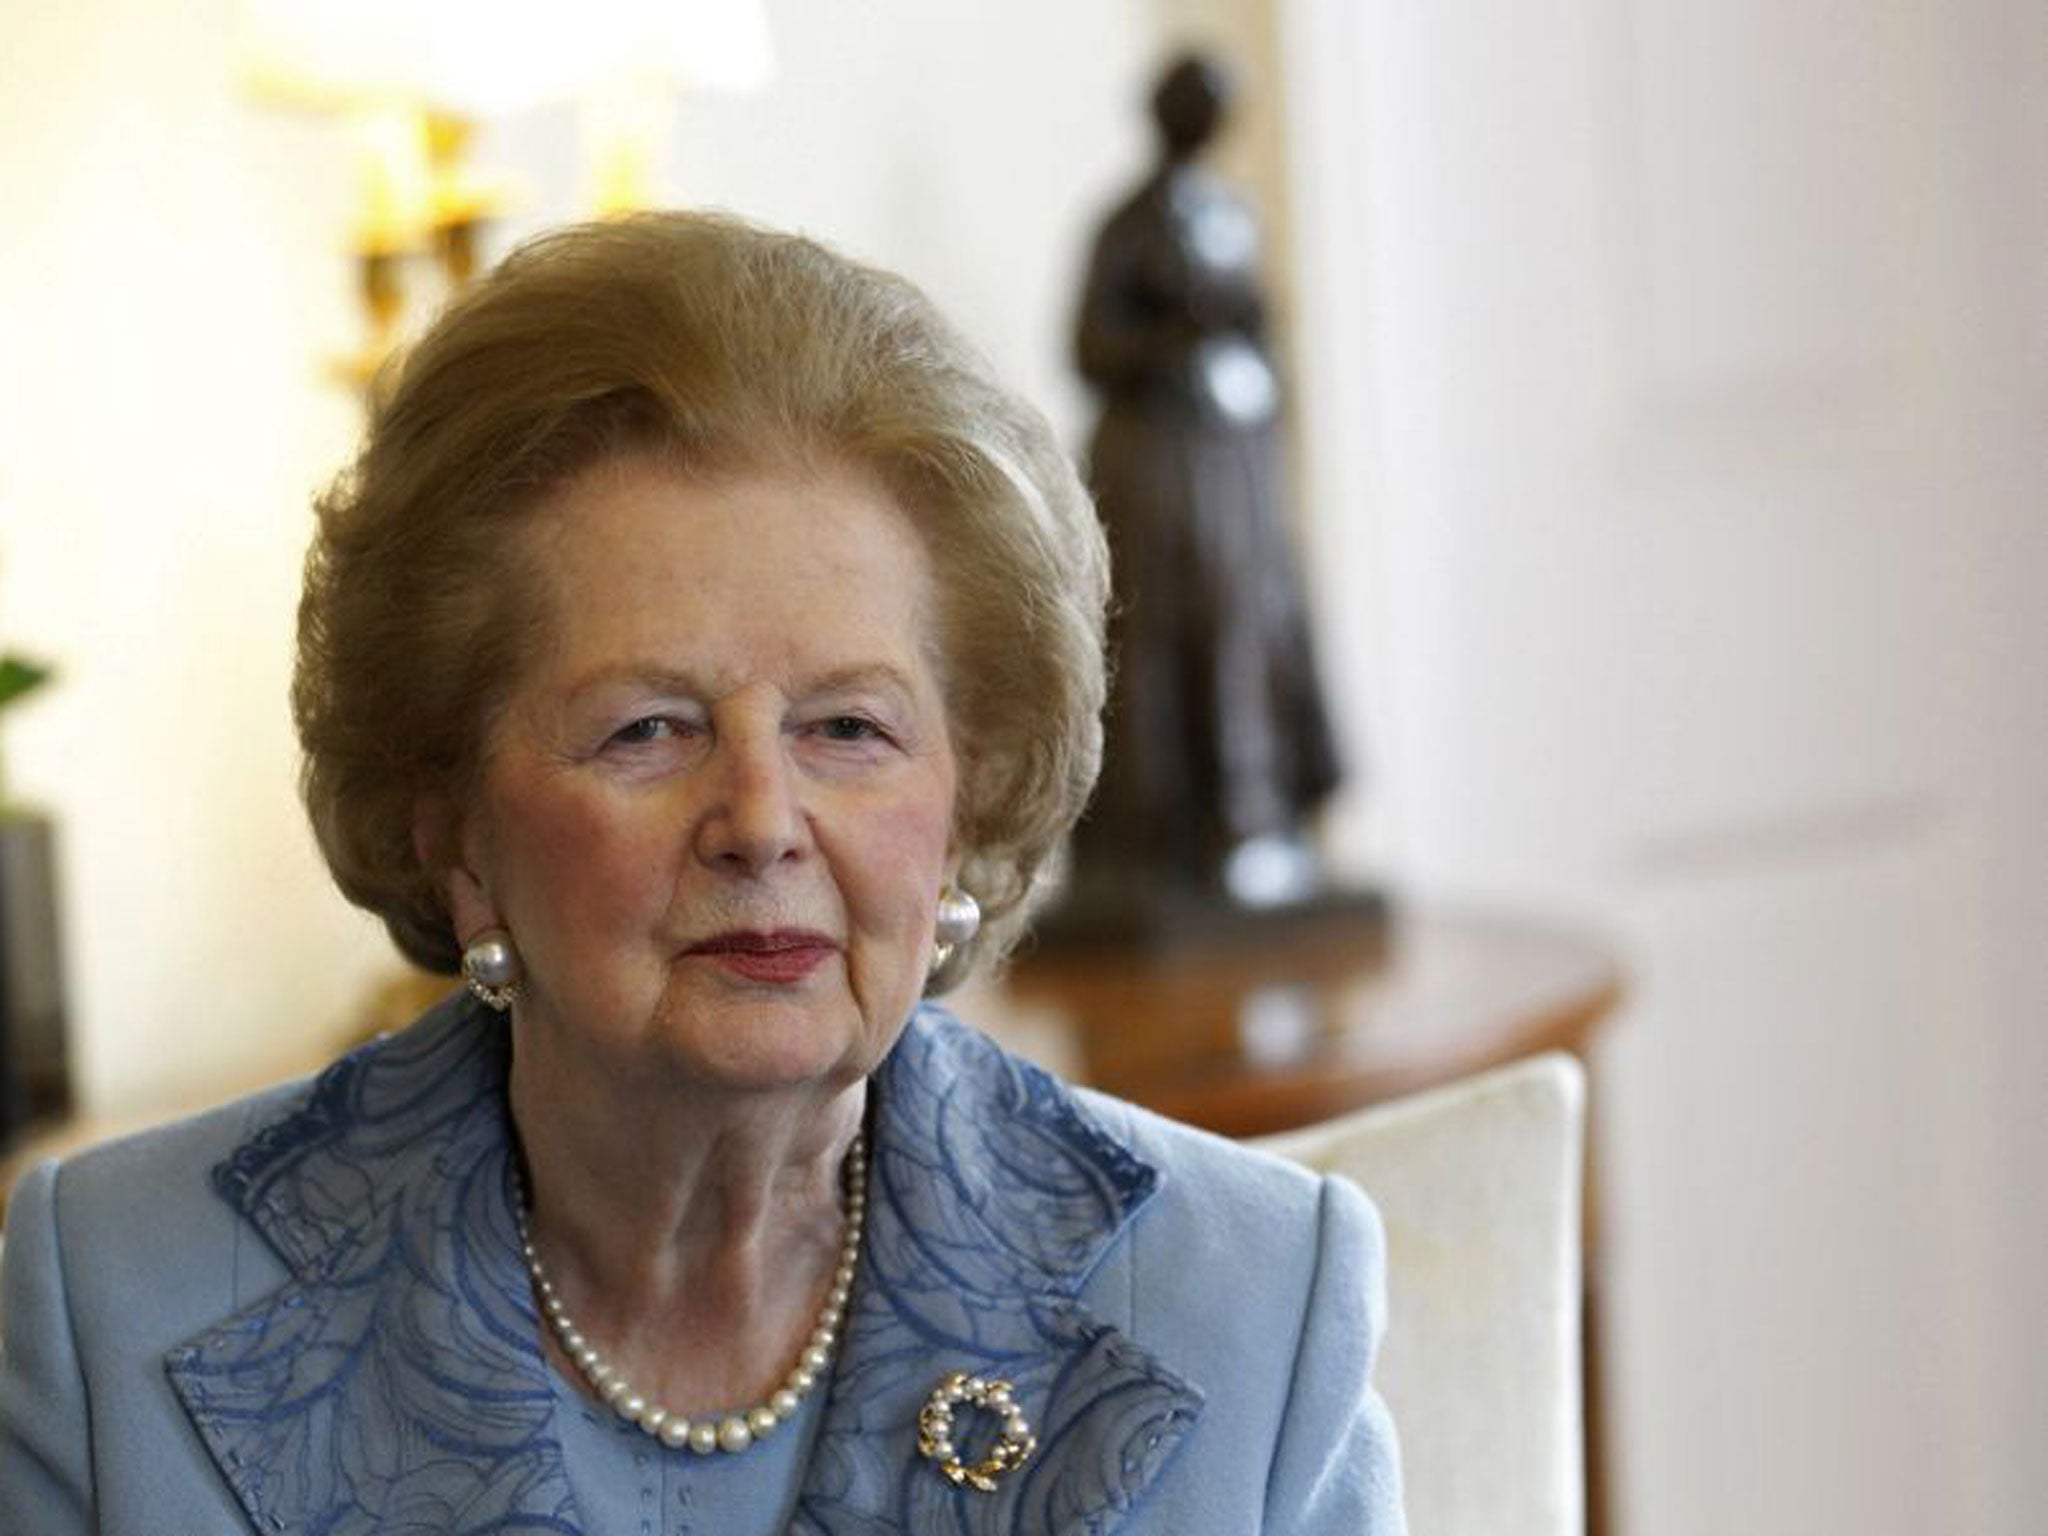 Baroness Thatcher was not well enough to join the Queen for a lunch with former and serving prime ministers as part of the Diamond Jubilee this summer